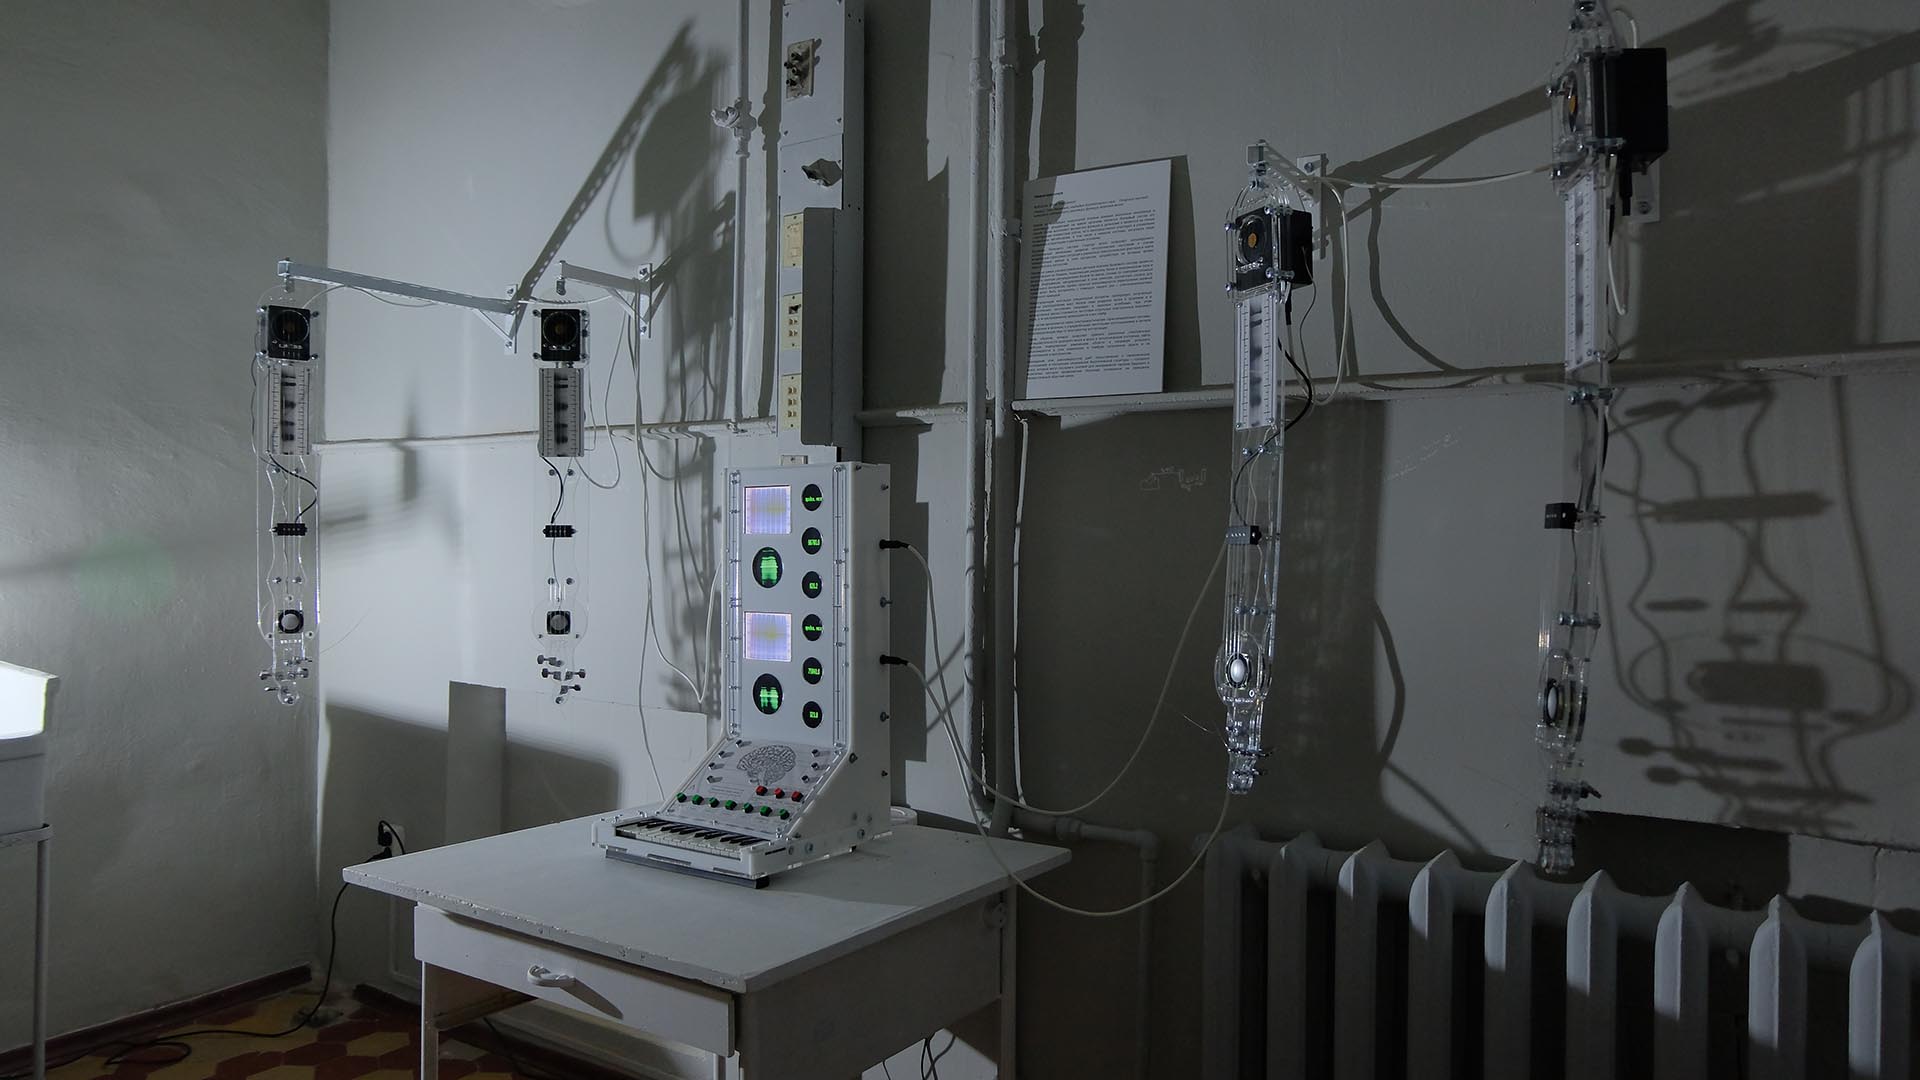 Neuroharmonium, 2019. This sound installation lets us hear the protein composition of neural tissue samples, and could potentially be used in non-invasive therapy in the future. Photo: Polina Shershenkova 